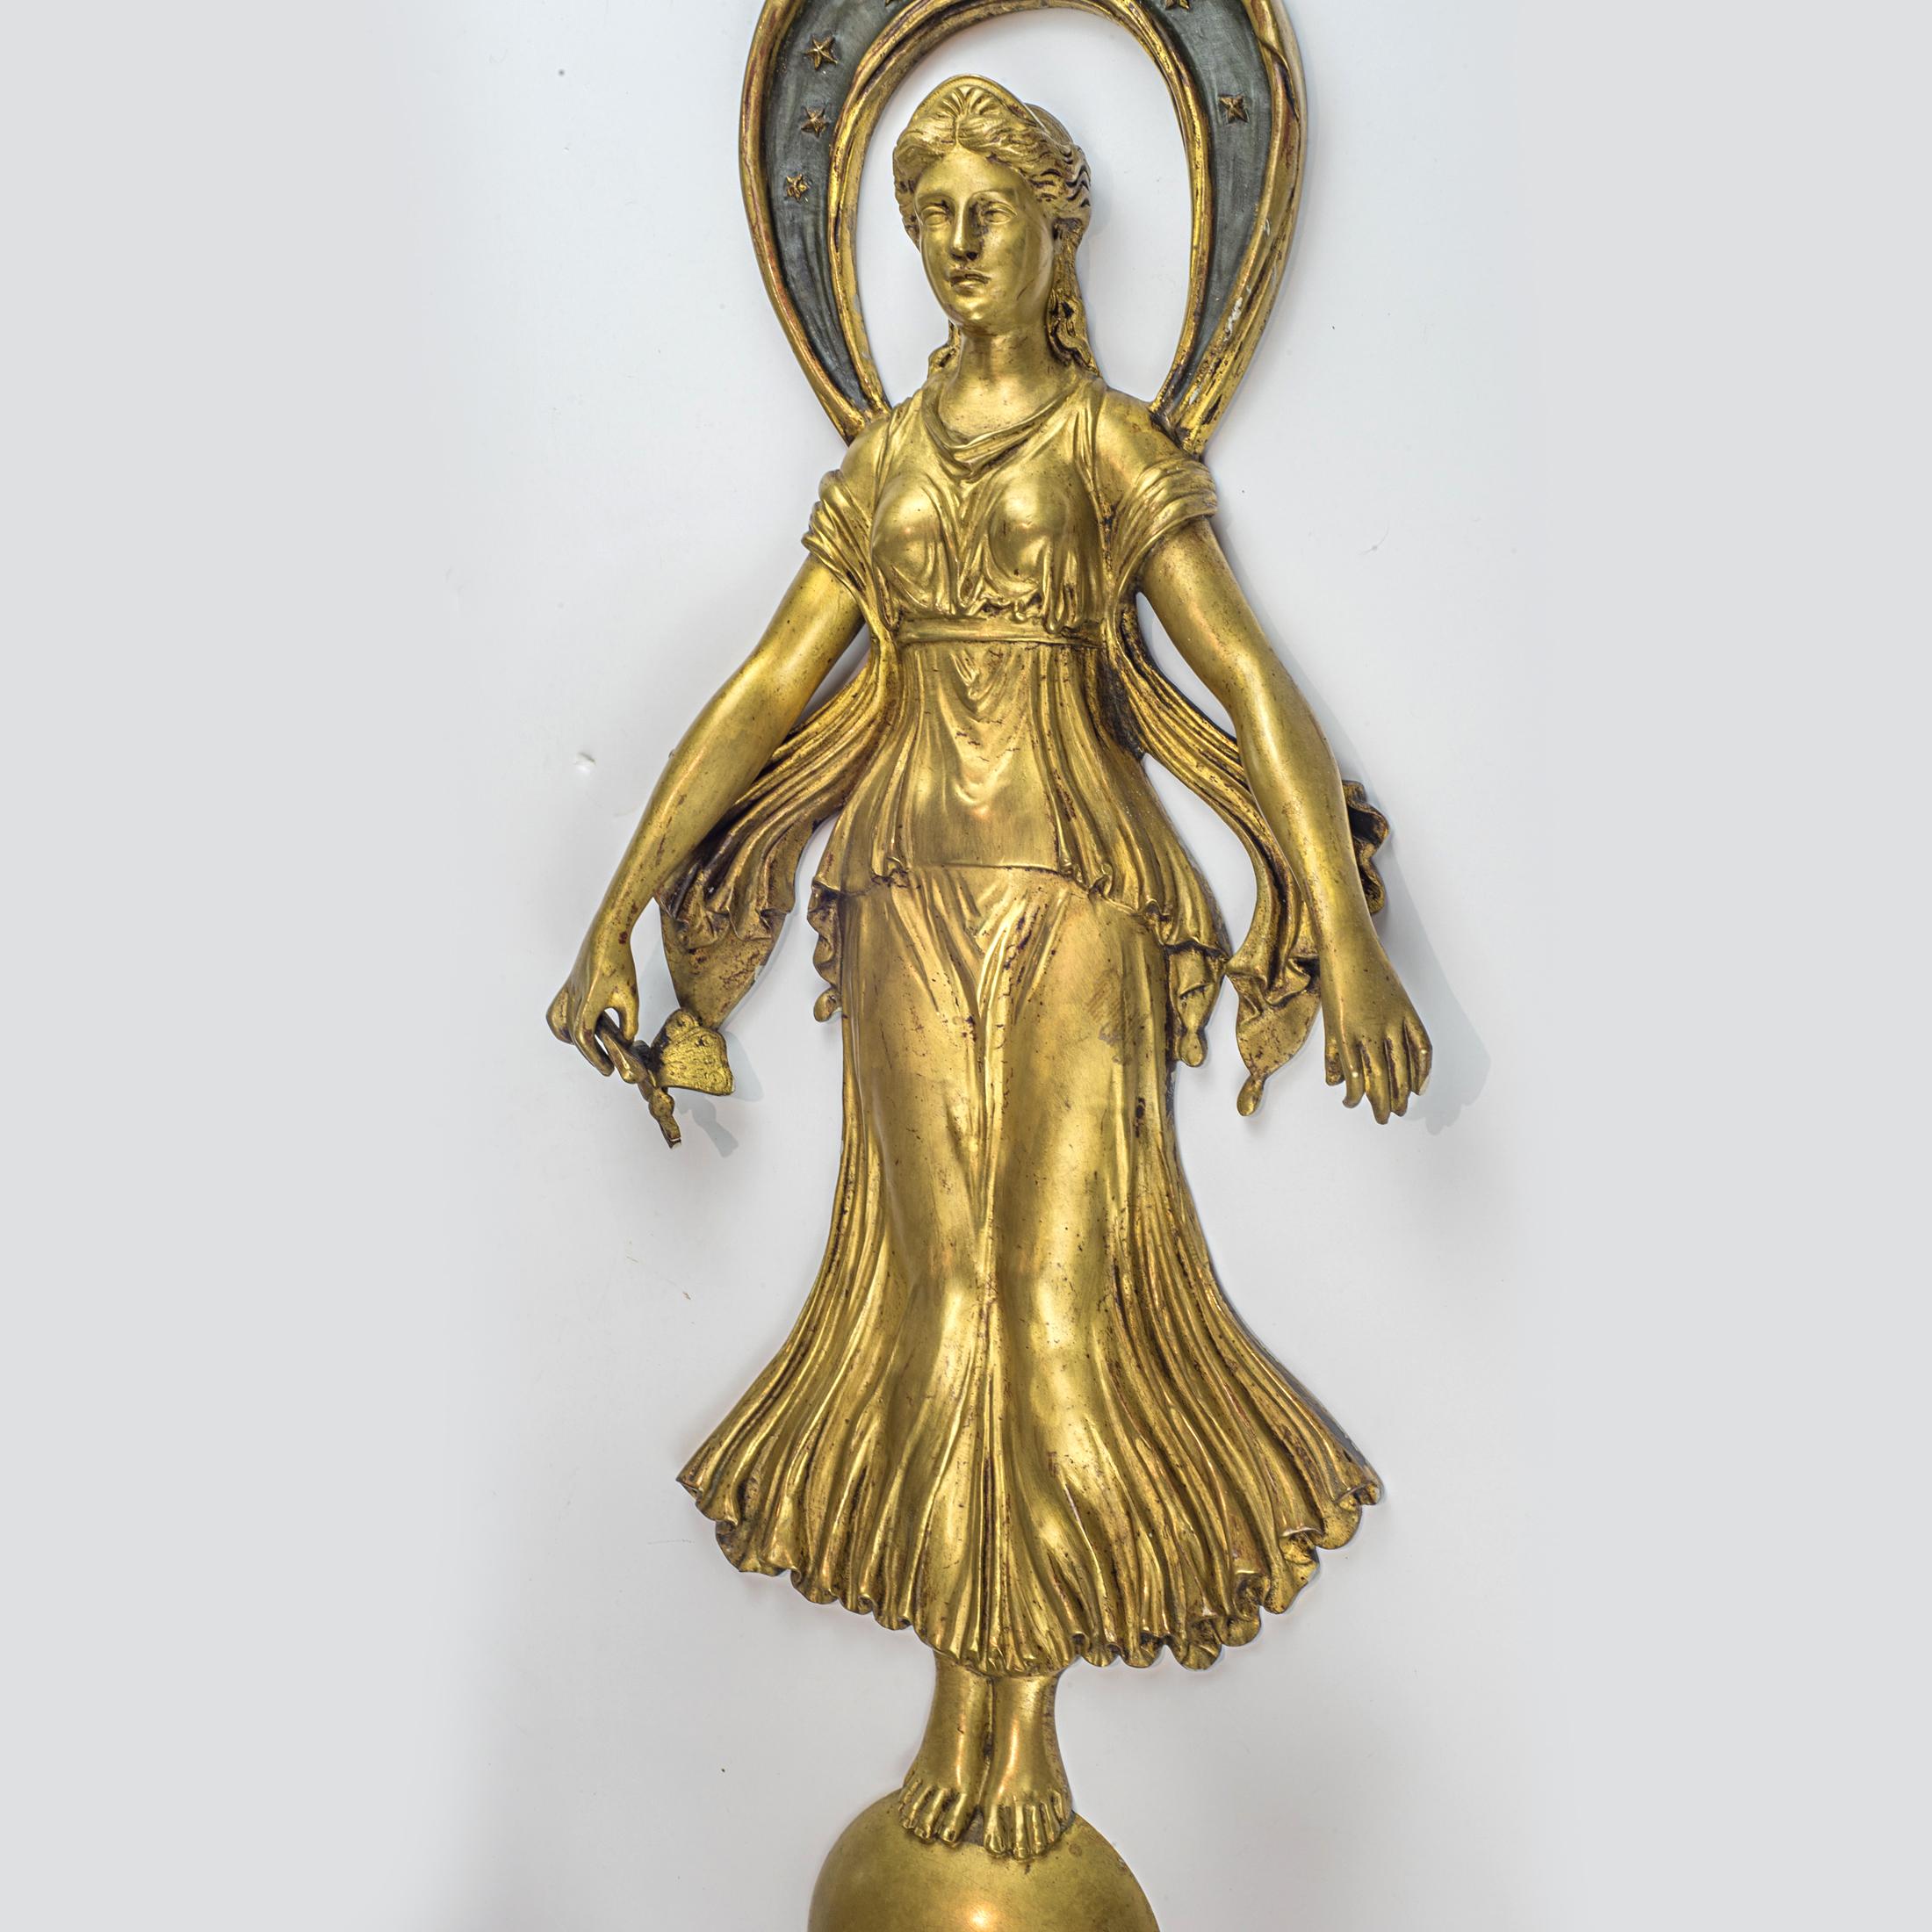 Large pair of French Empire style gilt bronze wall lights.
Surmounted by a classical female figure standing atop an orb and holding butterflies in each hand, above two tier structure issuing three candle arms cast with melusines above four arms in